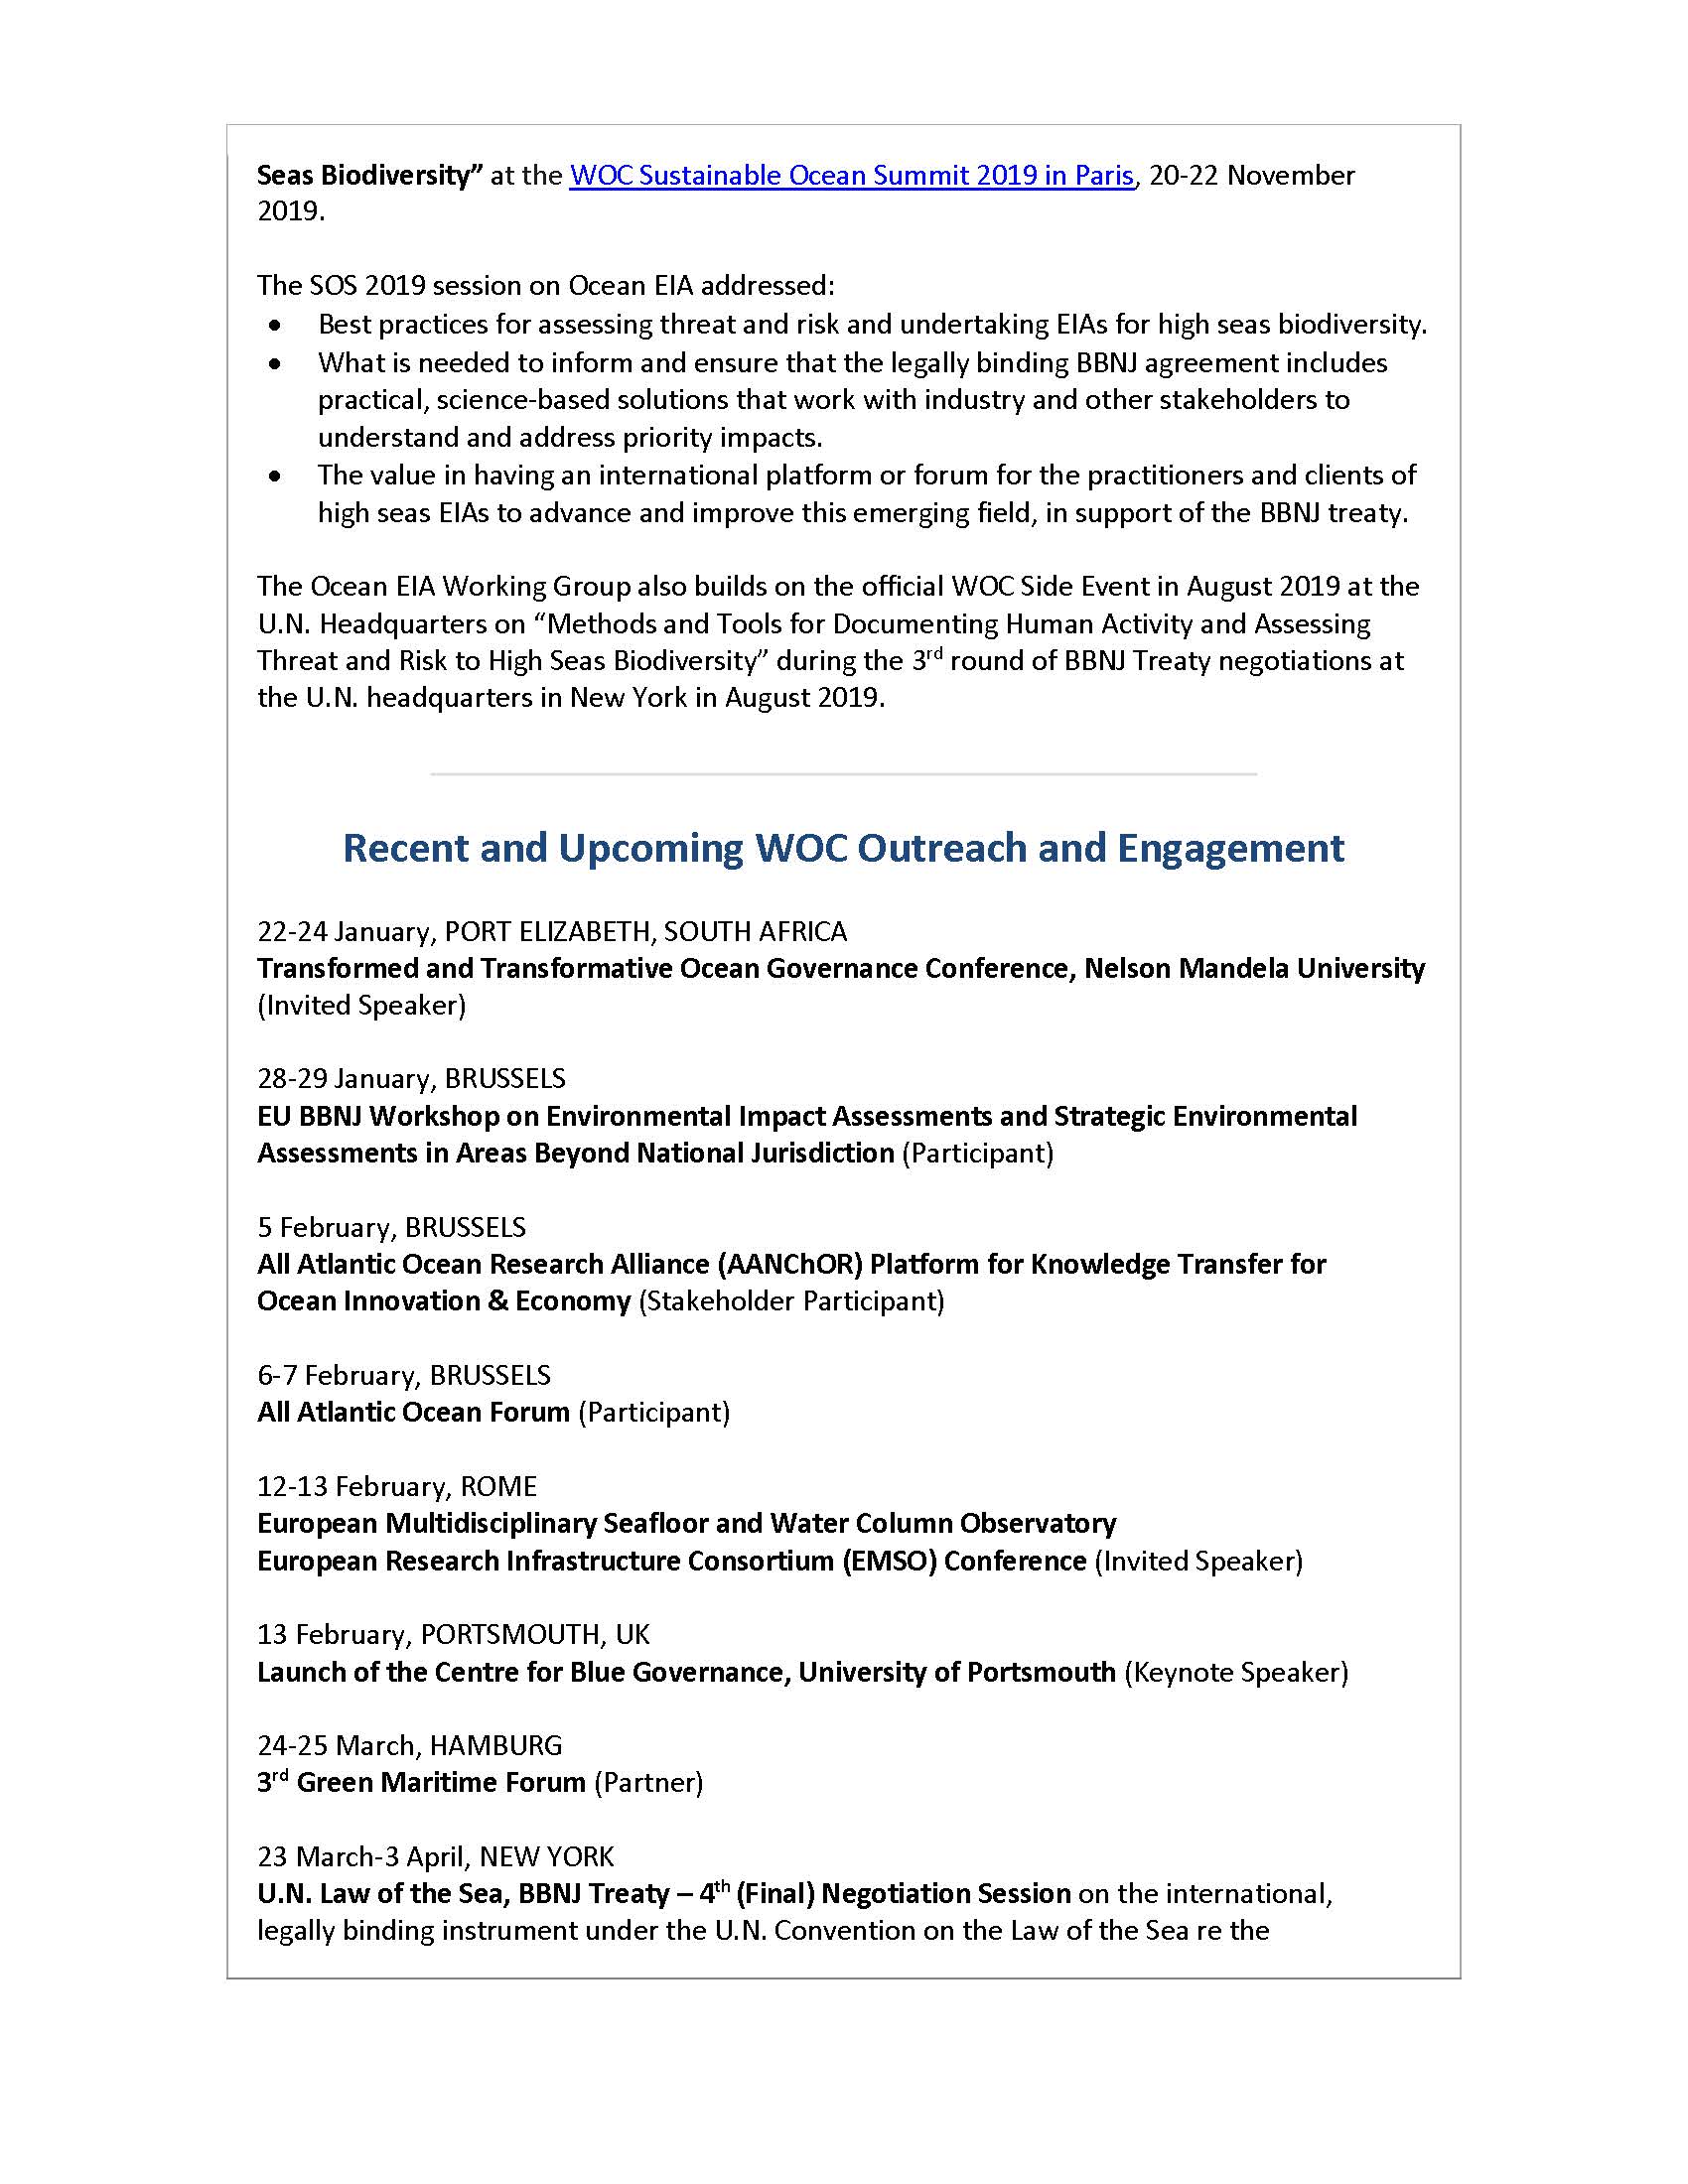 Ocean Environmental Impact Assessment: Invitation to Participate in WOC Working Group - 27 January 2020